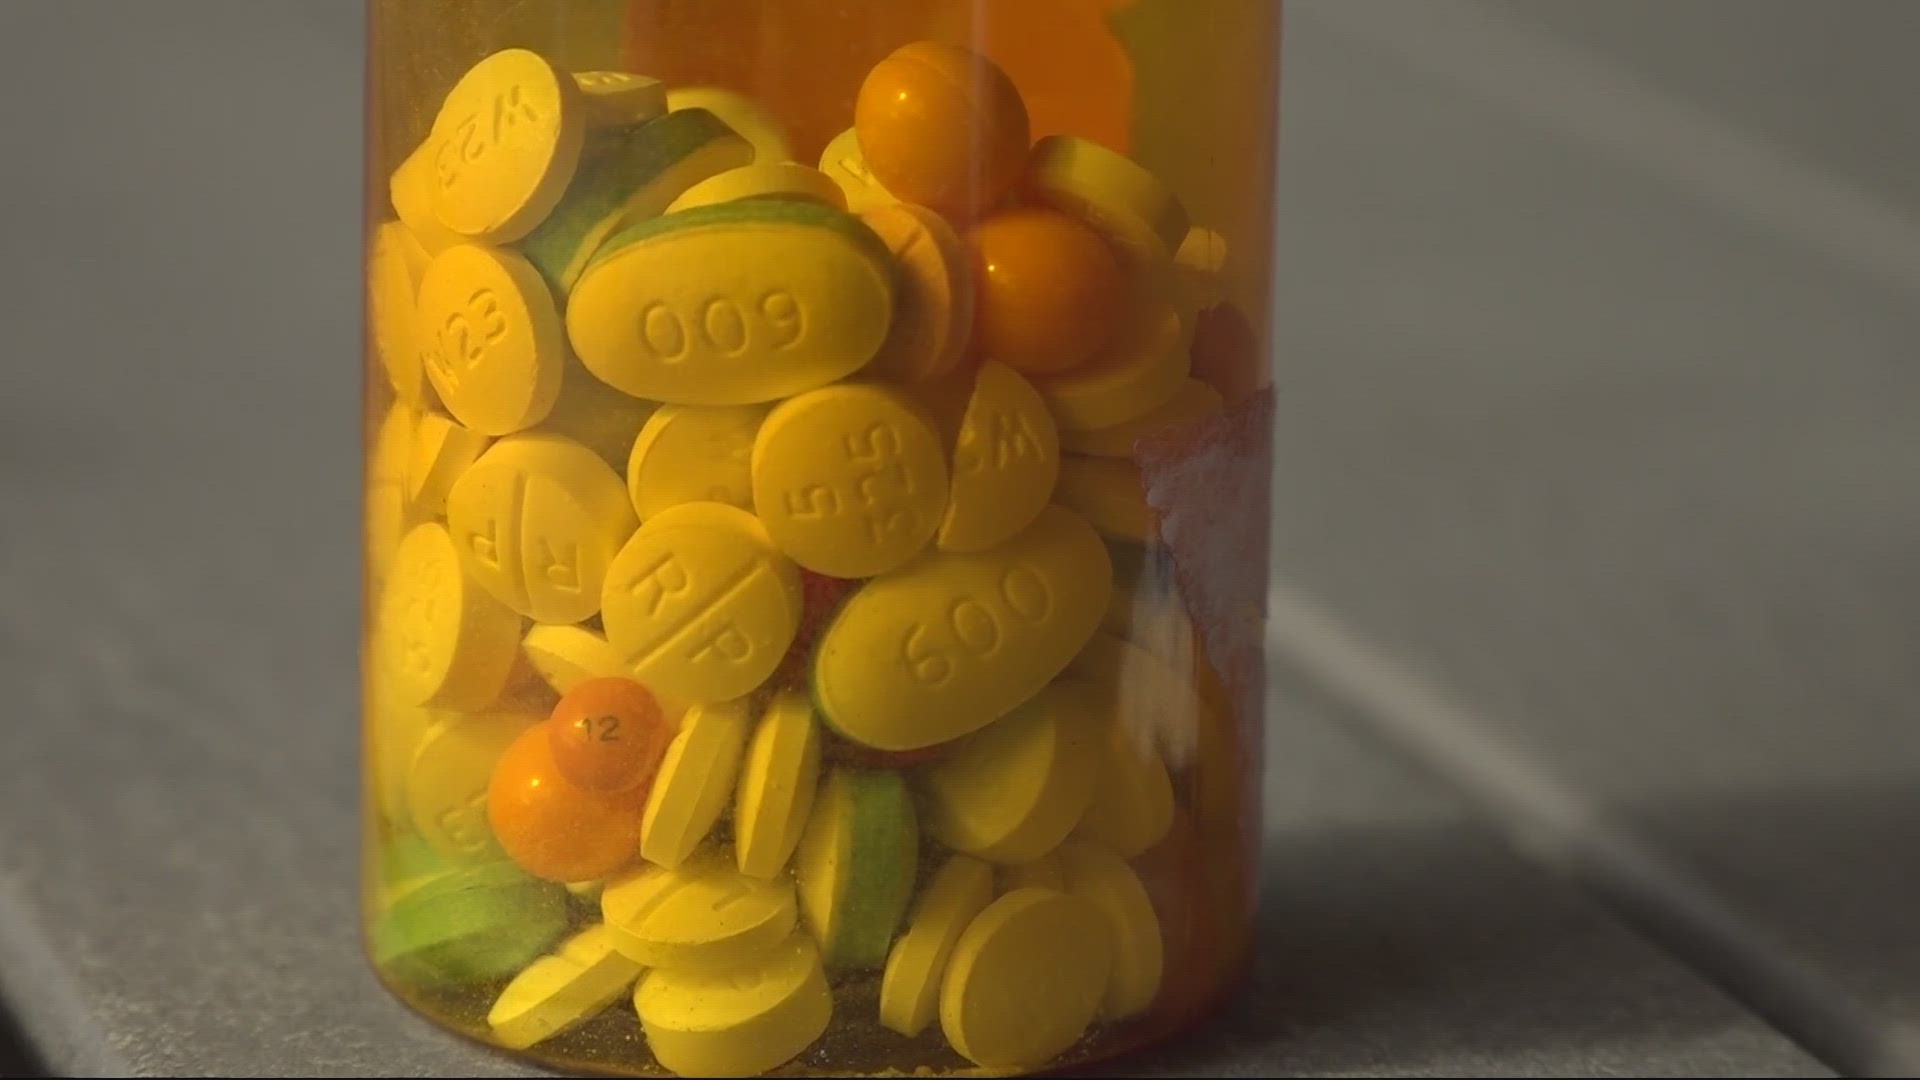 Your unused medications can contribute to the opioid crisis and hurt the environment, Florida Poison Control officials say.